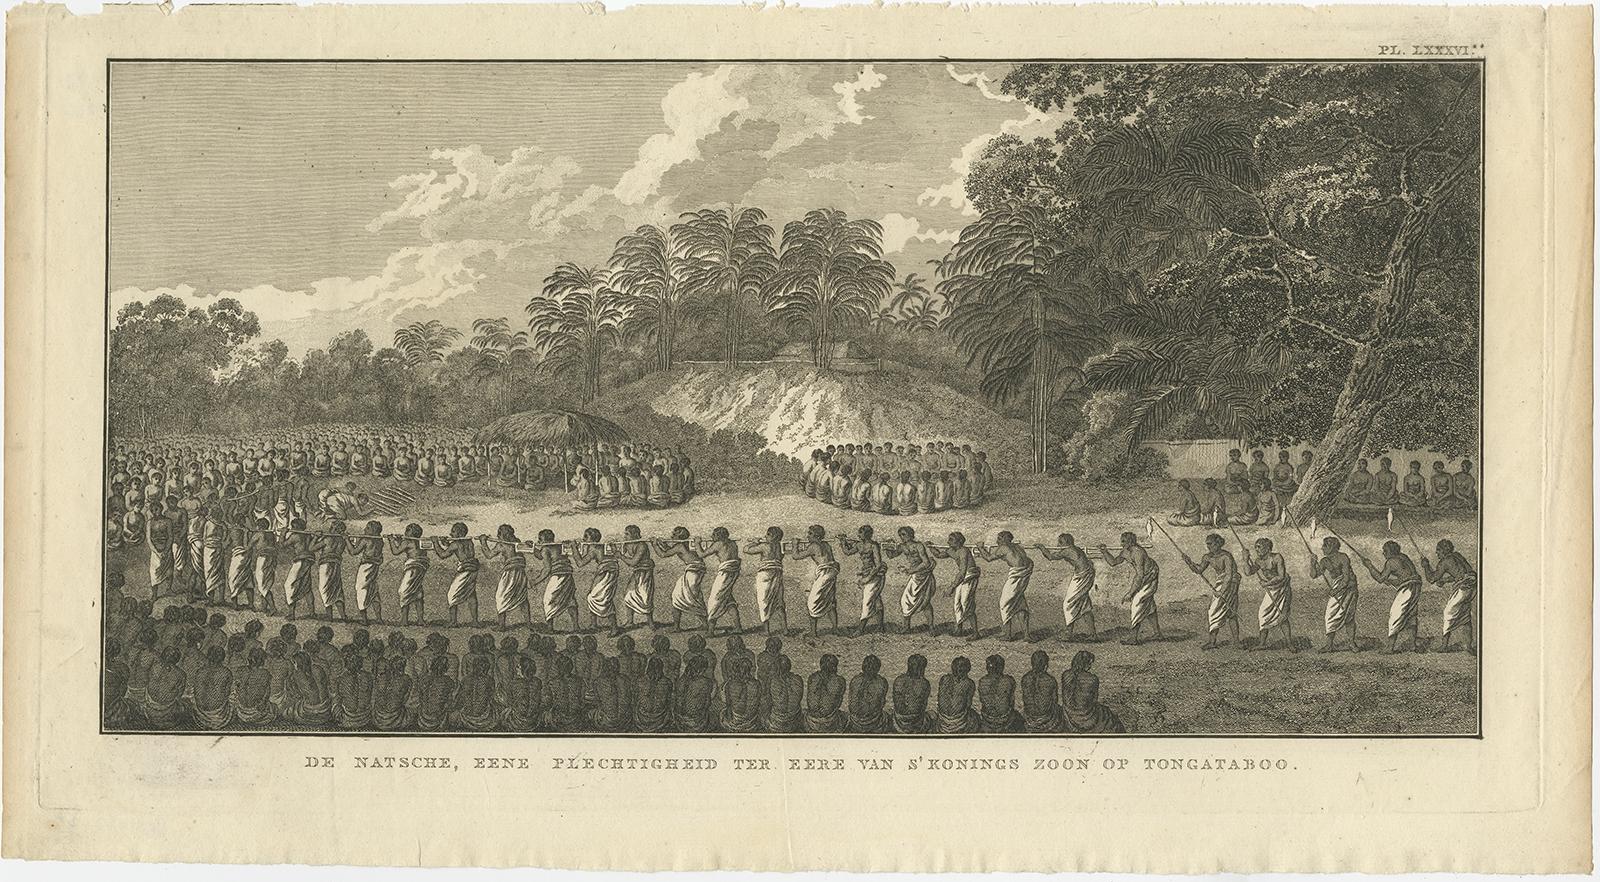 Antique print titled 'De Natsche, eene plechtigheid ter eere van 's Konings Zoon op Tongataboo'. 

Antique print depiciting a ceremony for the son of the King of Tonga in the village of Mua on the main Tongan Island of Tongatapu, at the time of